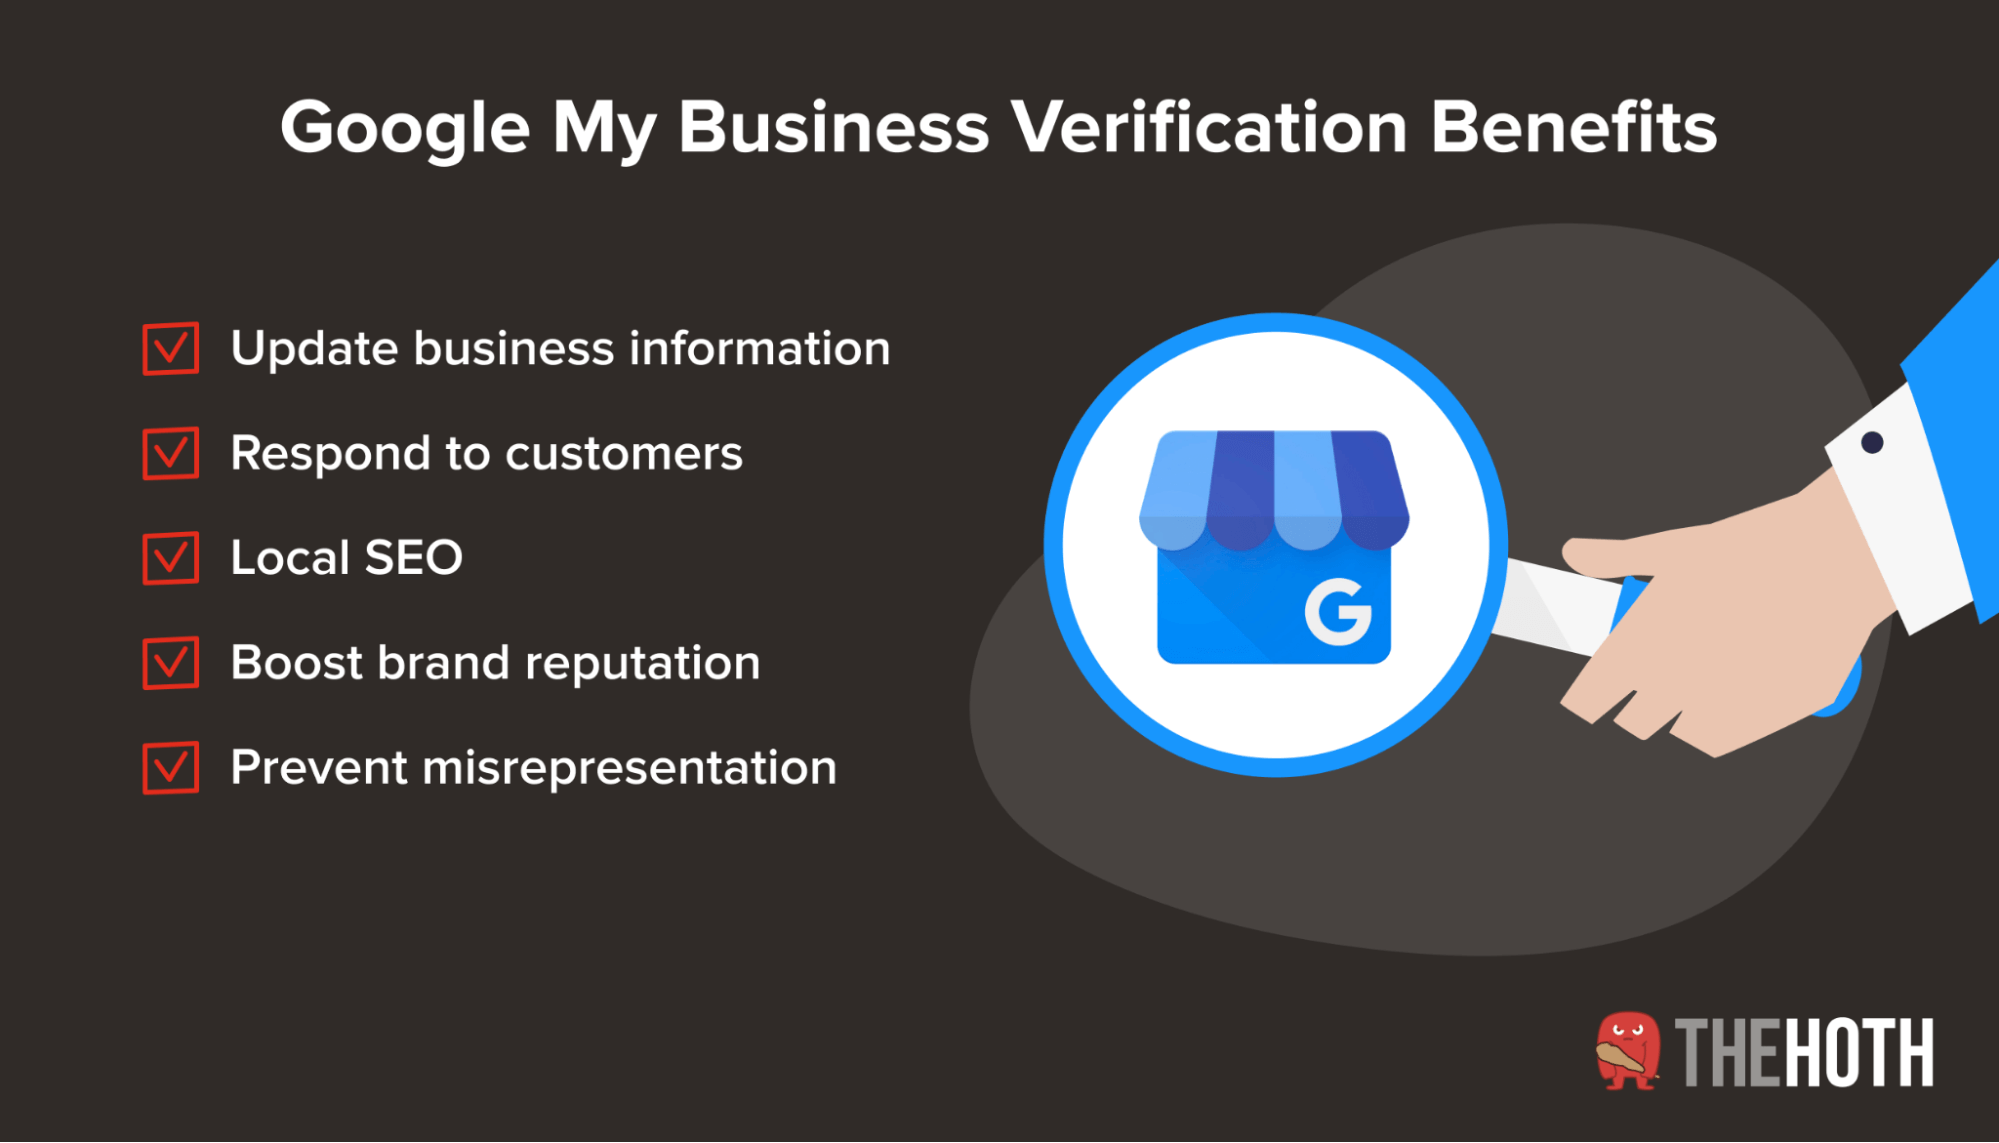 The importance of getting Google My Business verification